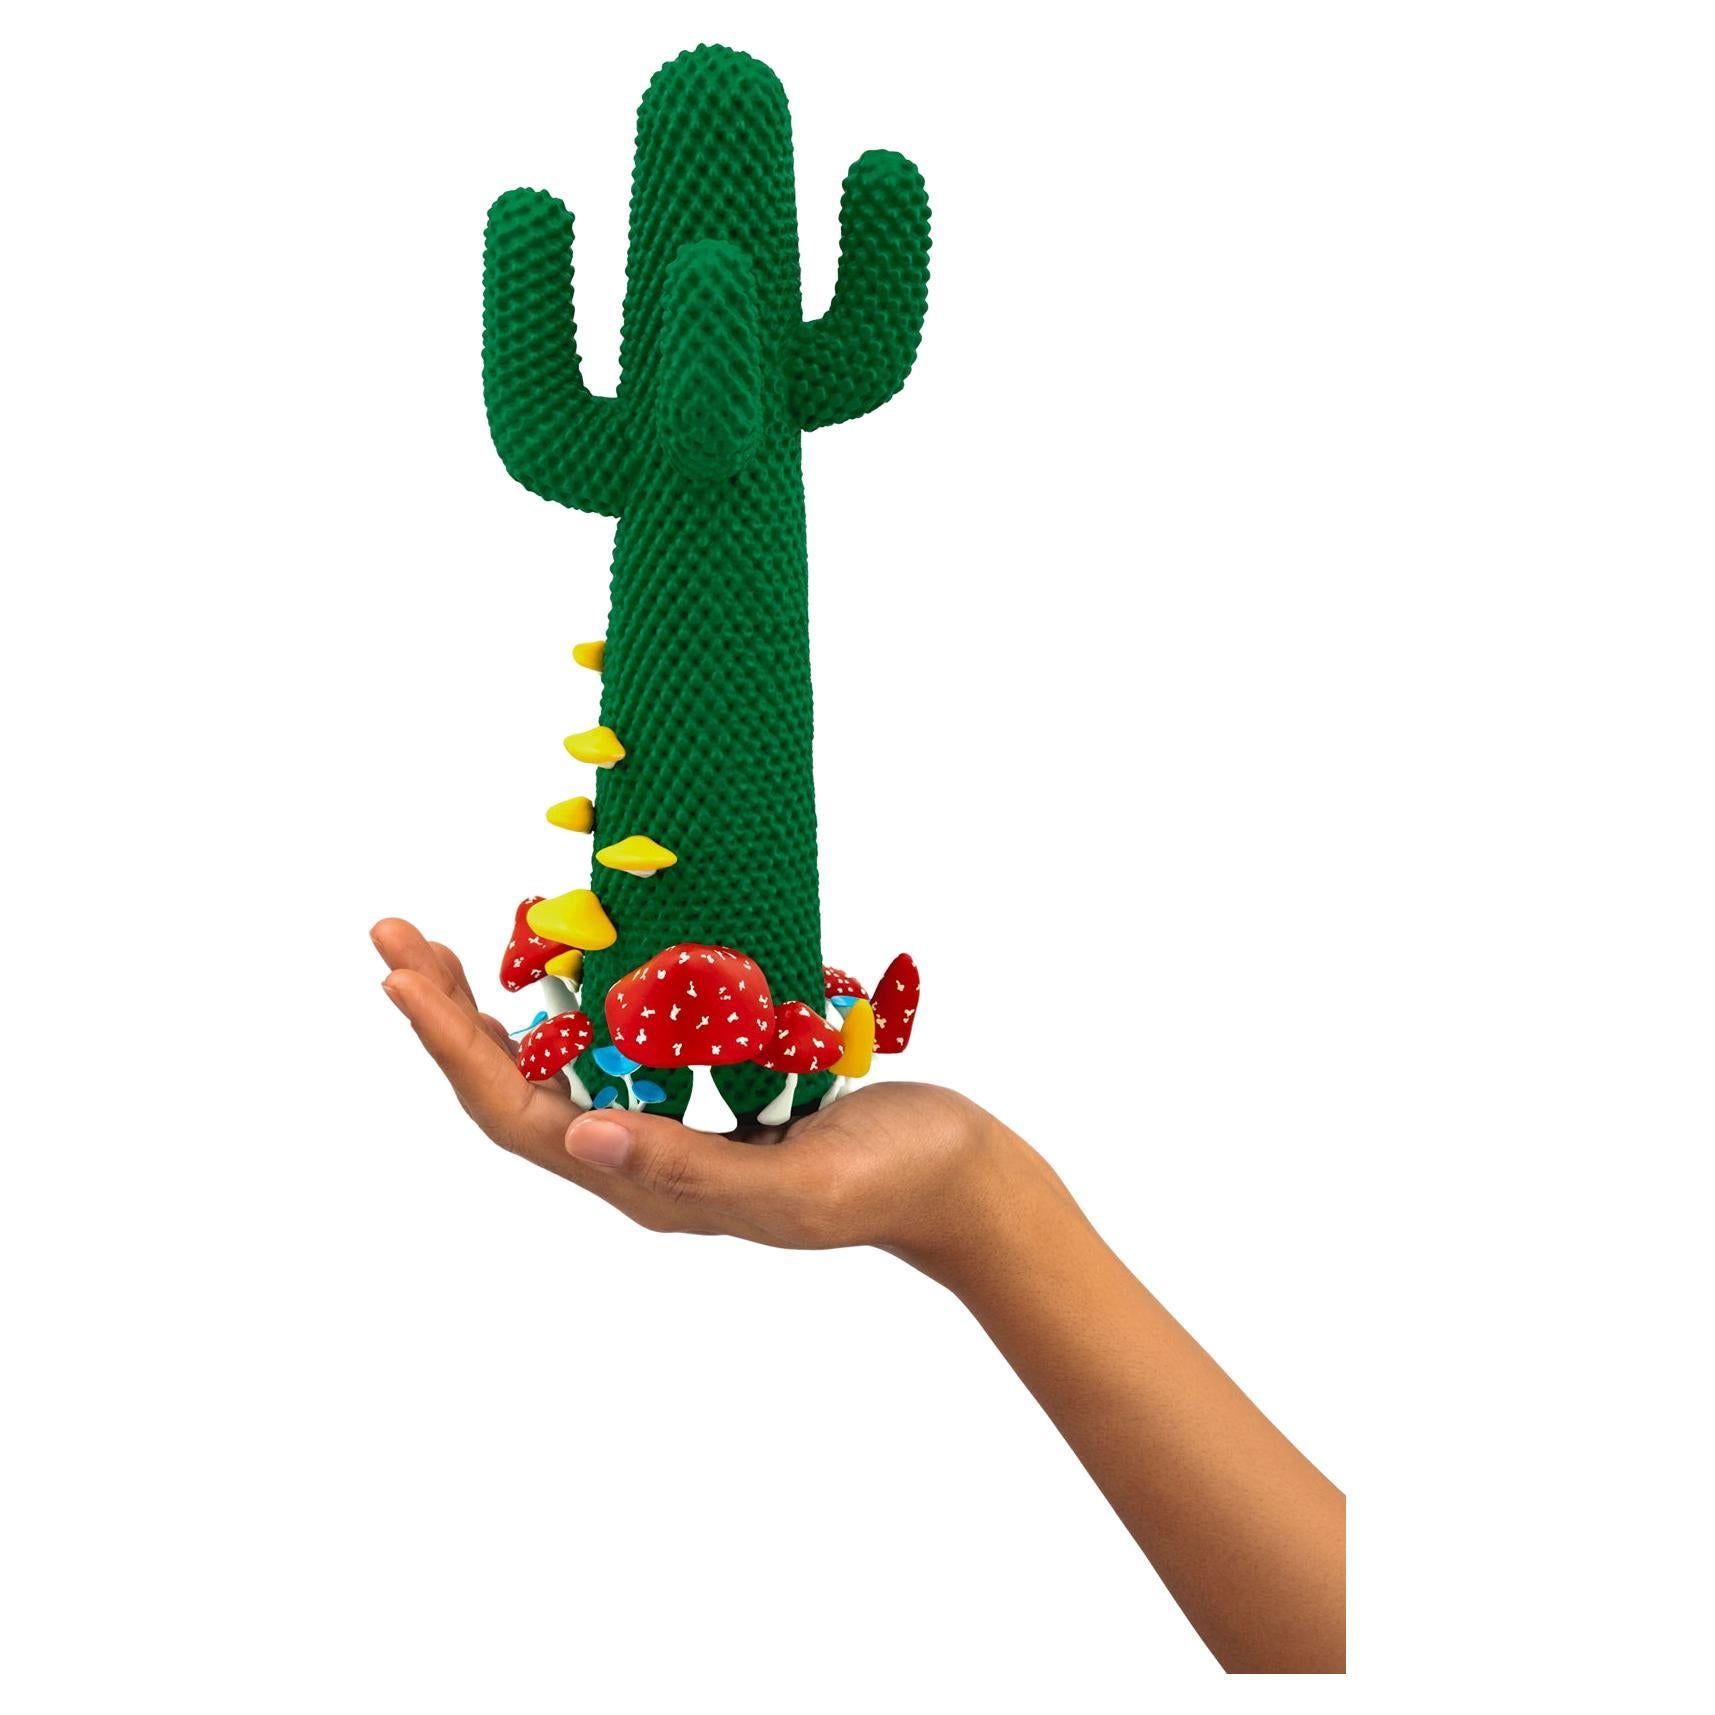 Limited Edition #68/99

Gufram presents the miniaturised version of the Shroom CACTUS® created in collaboration with A$AP Rocky and the artist’s new design studio HOMMEMADE Exactly as the real-Size Shroom CACTUS®, the new Guframini piece features